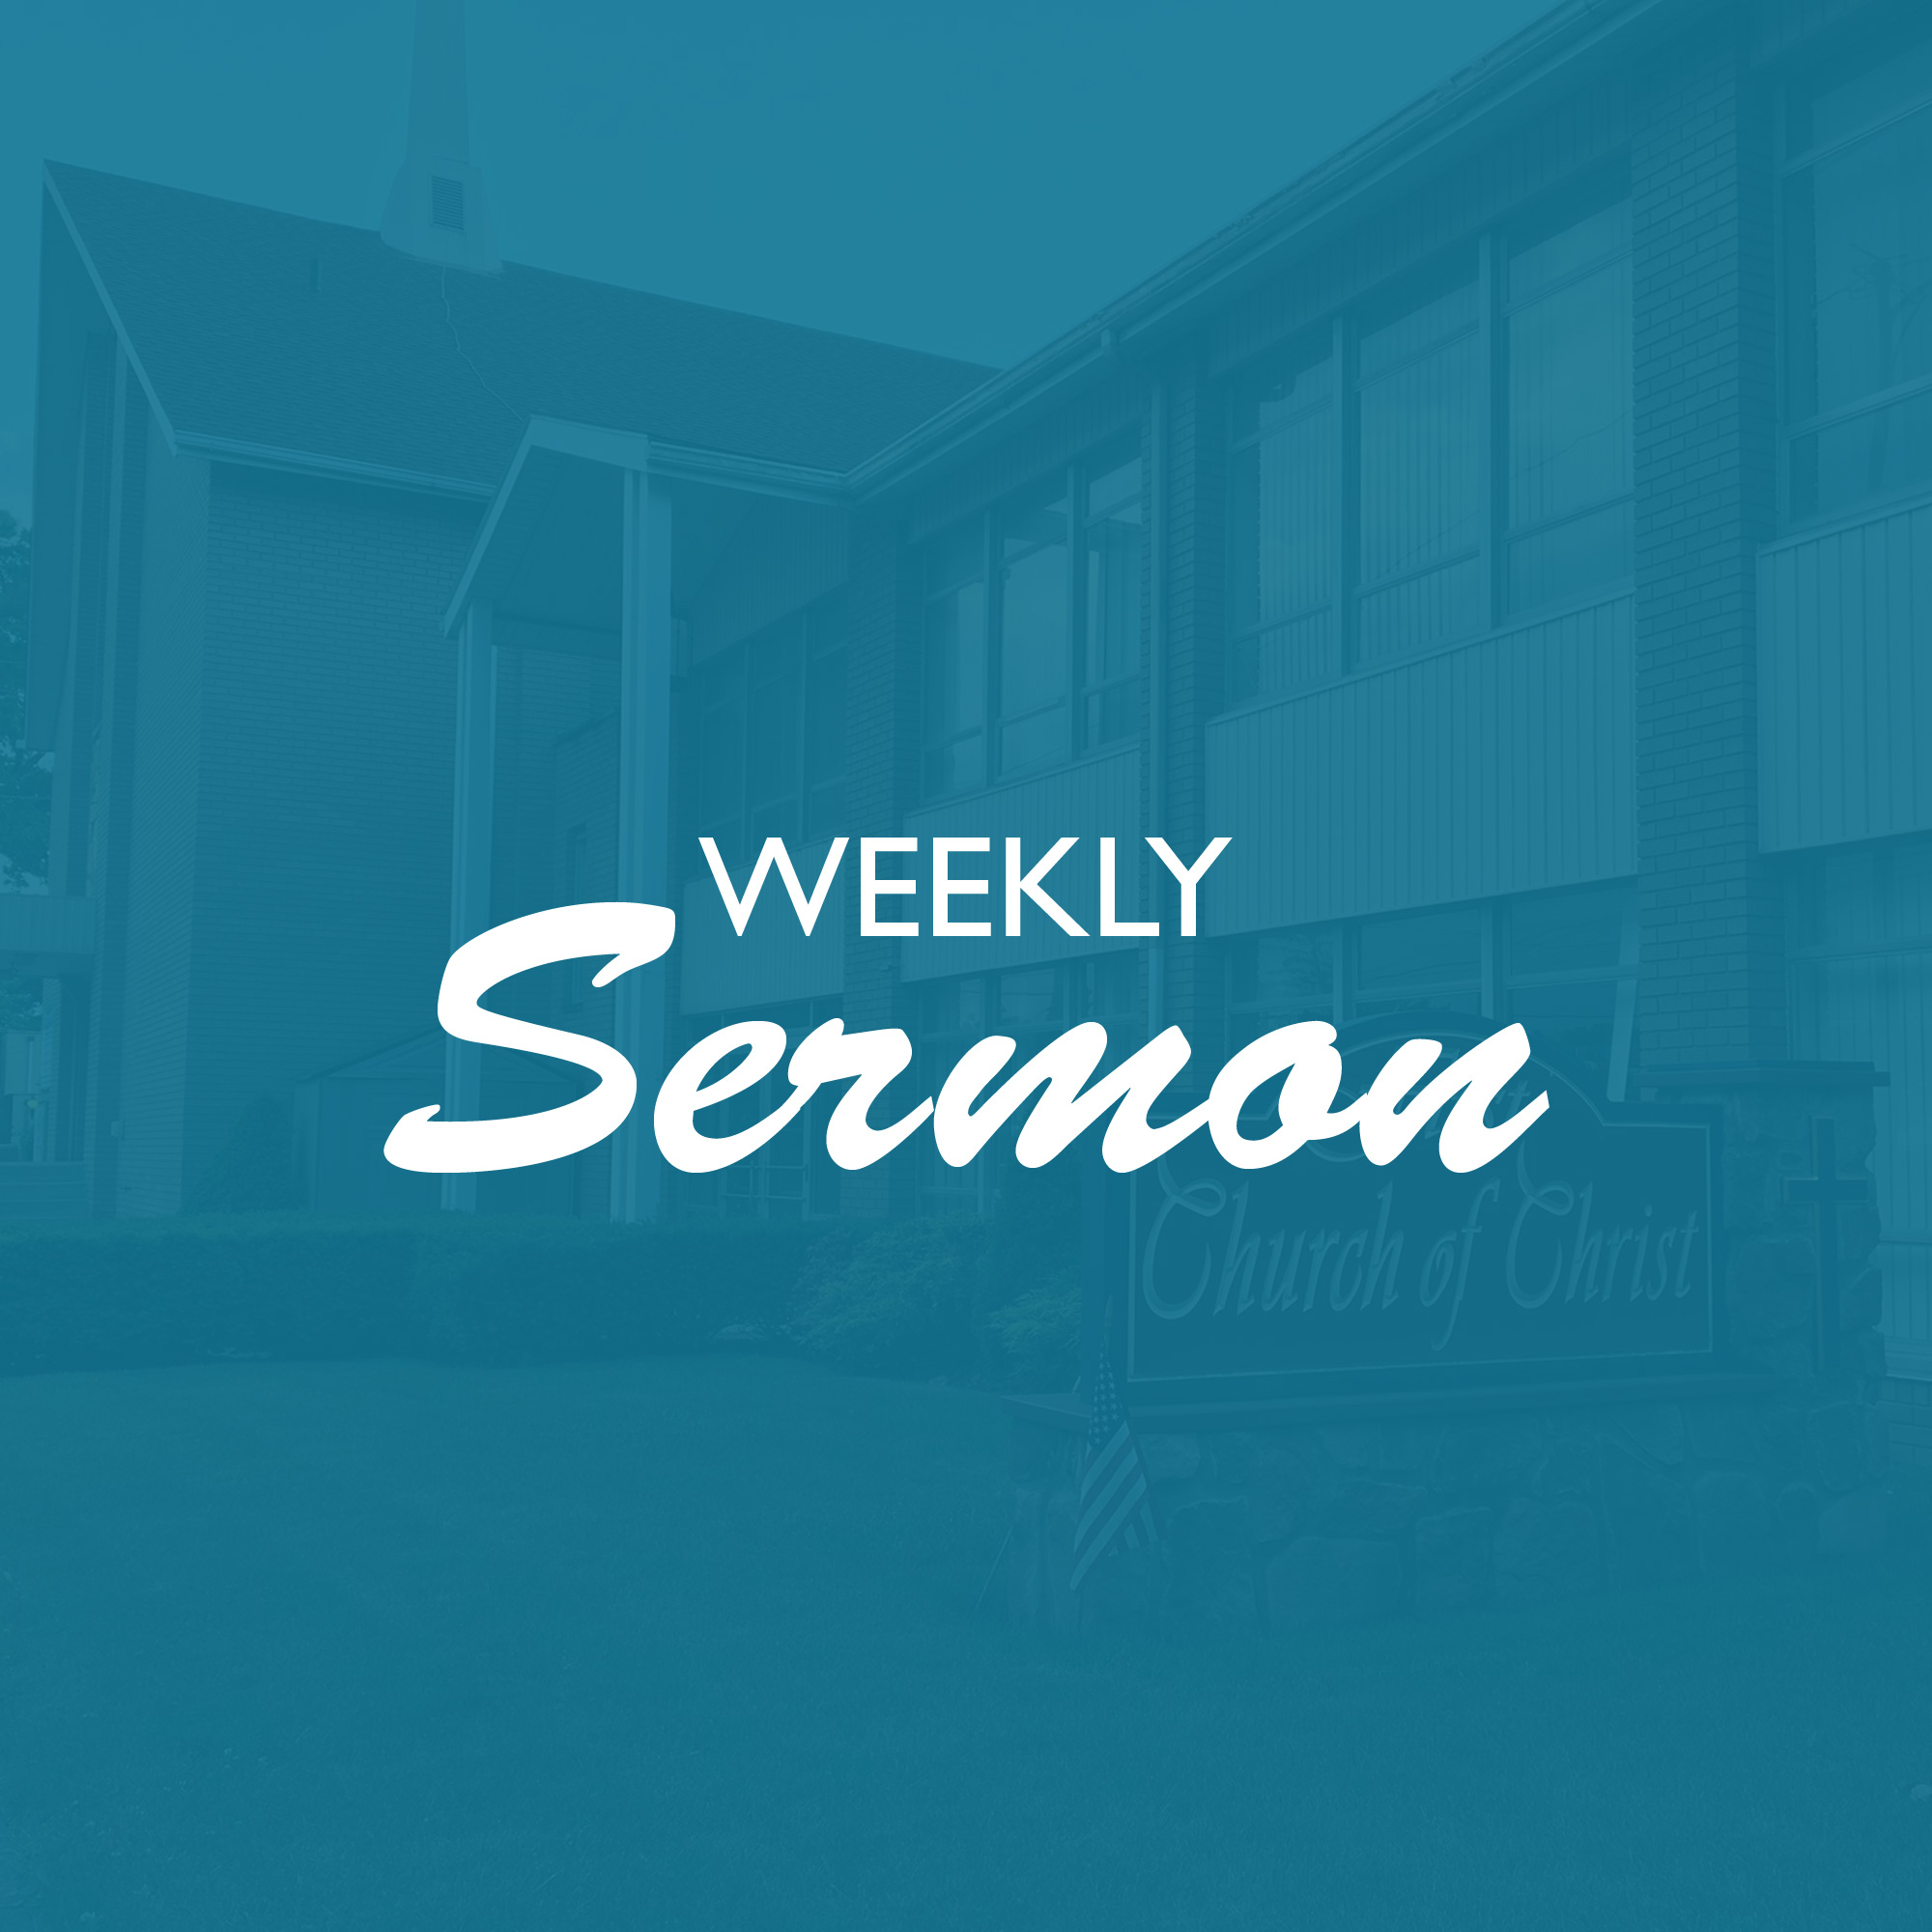 East Palestine First Church of Christ Weekly Sermons